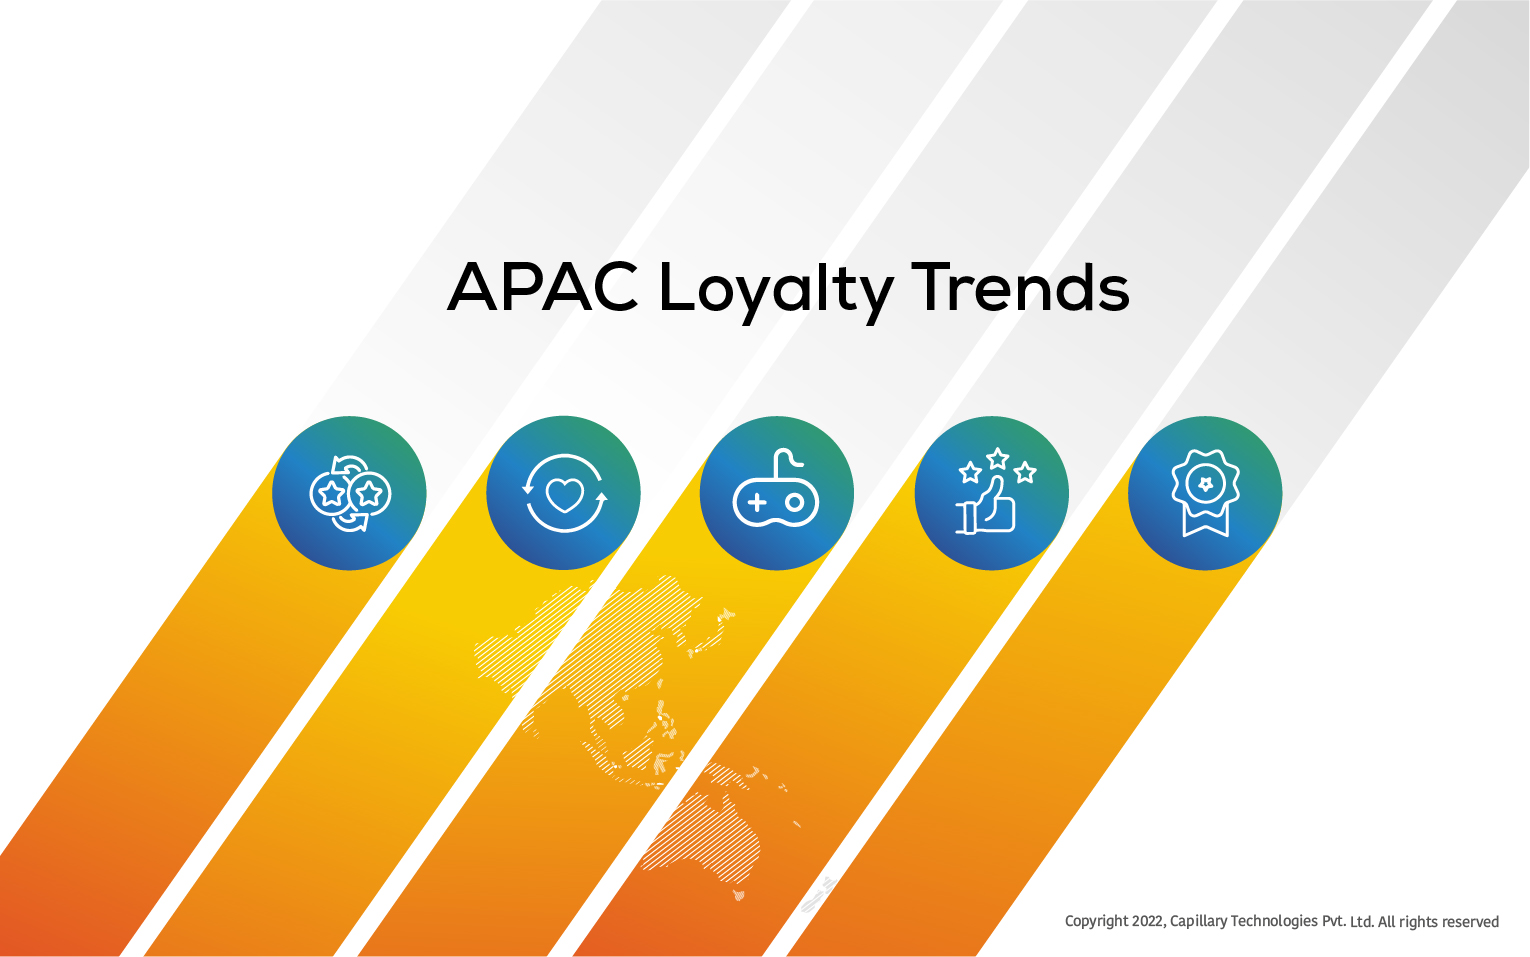 Innovation Not There? Developing a Lucrative Loyalty Program in APAC